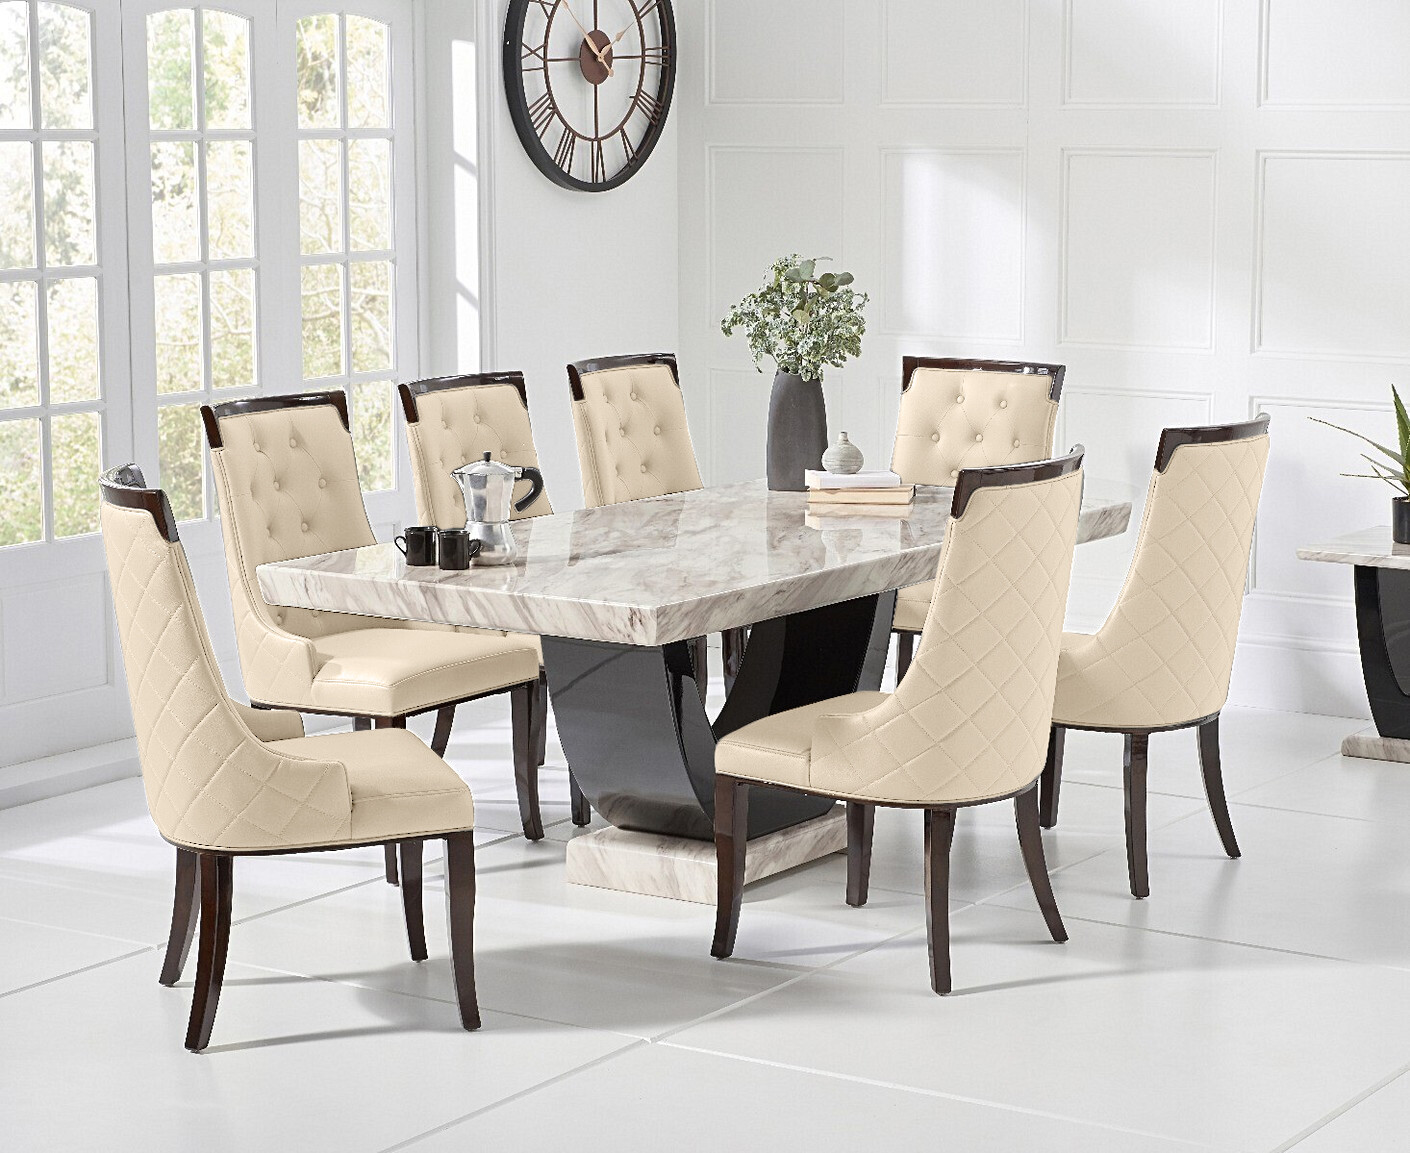 Photo 2 of Novara 200cm cream and black pedestal marble dining table with 8 cream francesca chairs